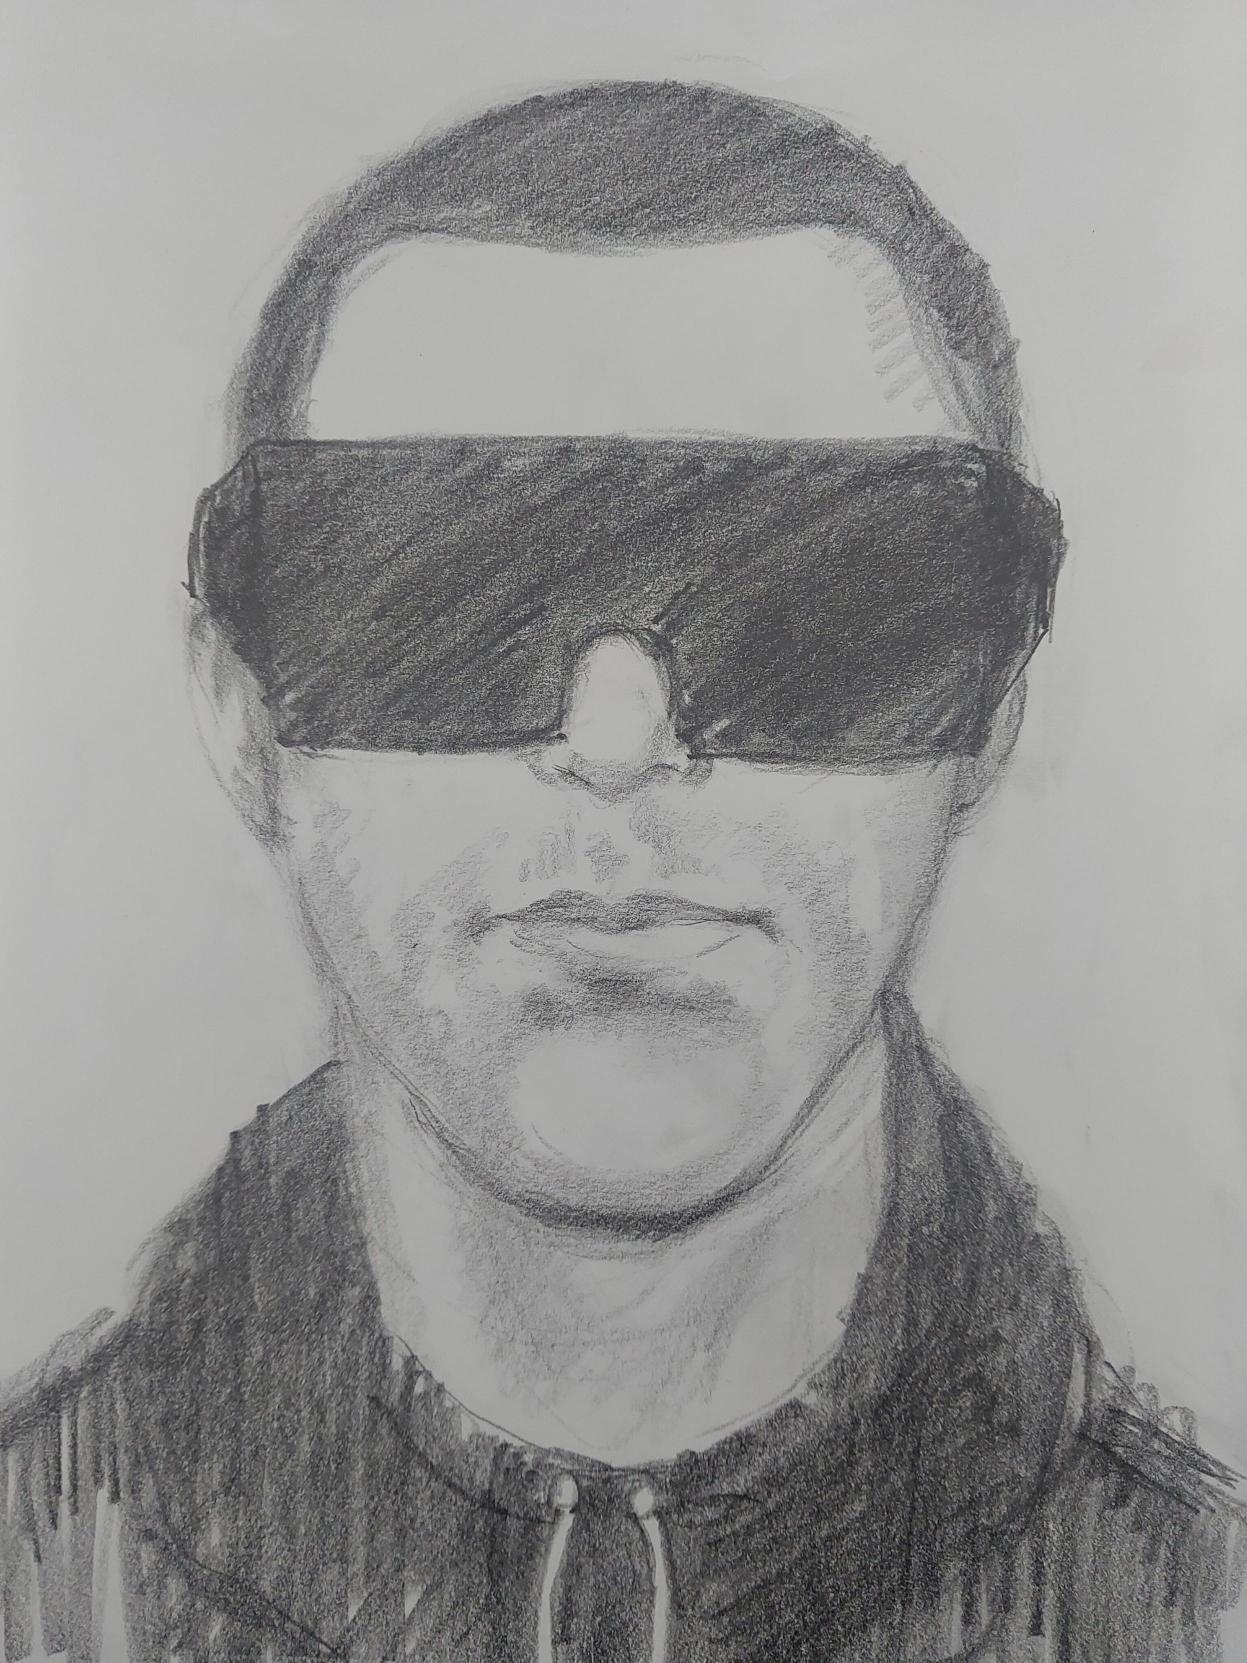 Derbyshire Constabulary have released a sketch of a man they would like to talk to as part of an investigation into a sexual assault in Swanwick on Father's Day 2022